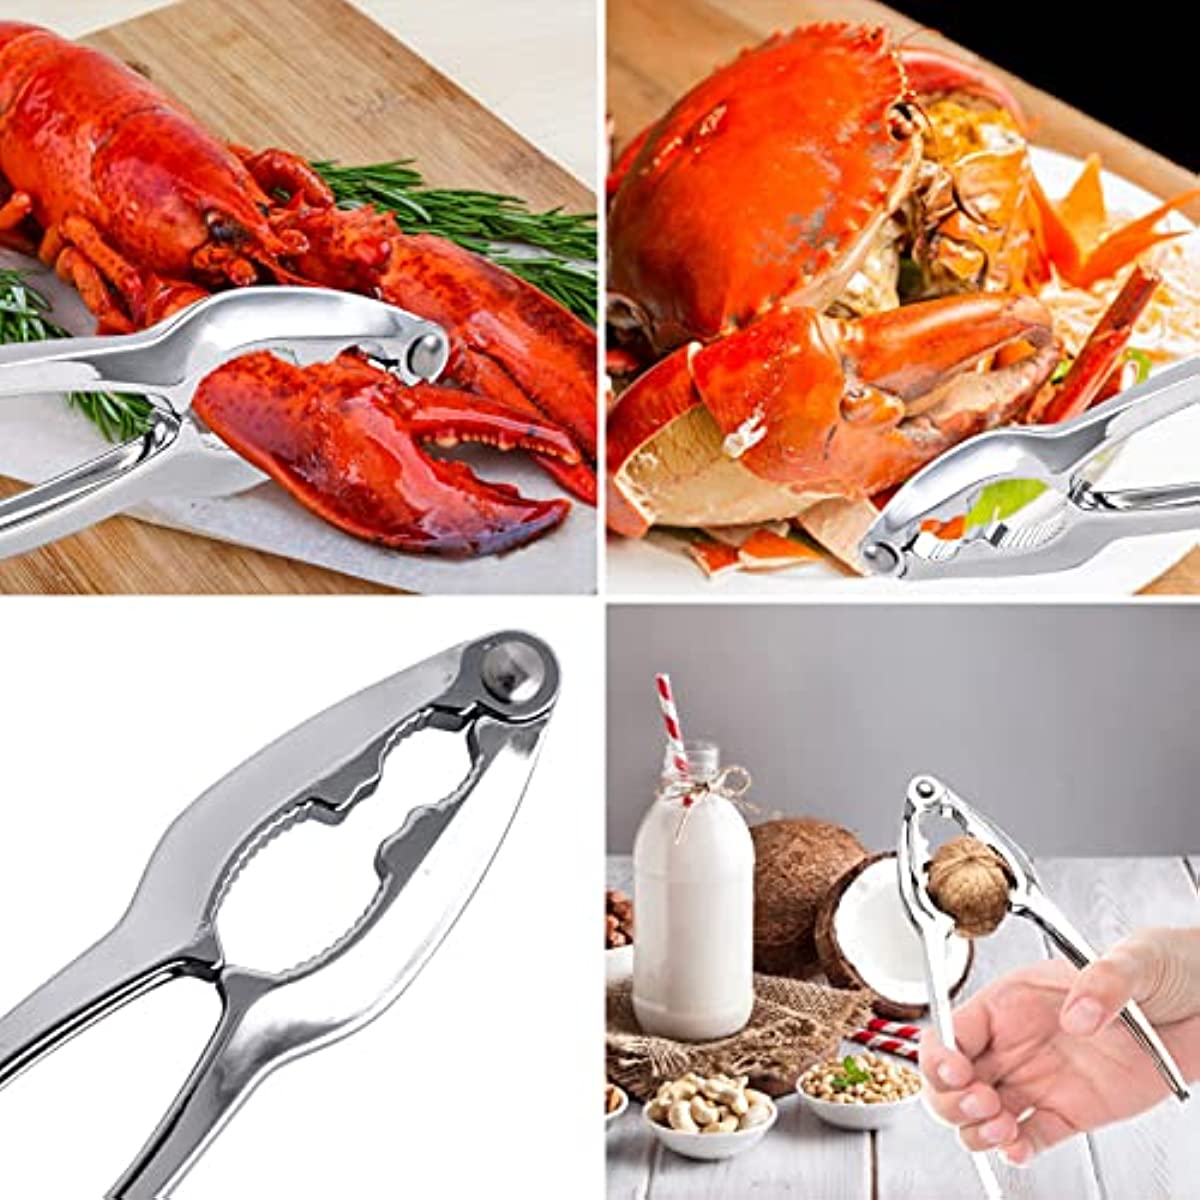 Stainless Steel Seafood Tools Set Perfect For Cracking Lobster